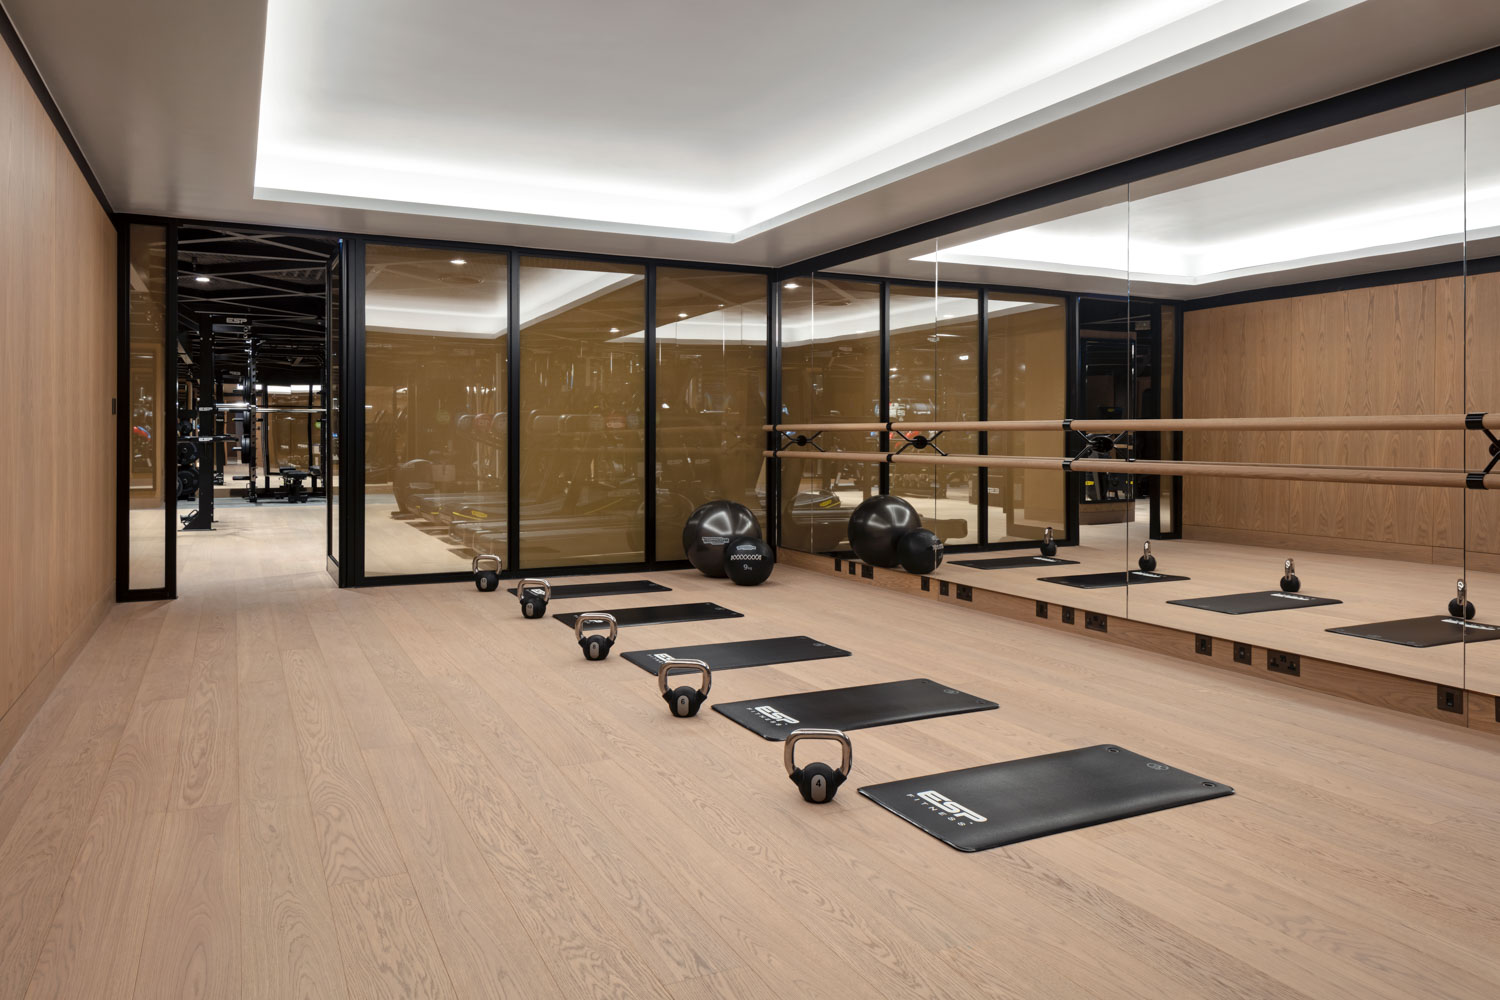 The gym is curated with Technogym and SB Wellness, ensuring the best equipment and one-on-one training